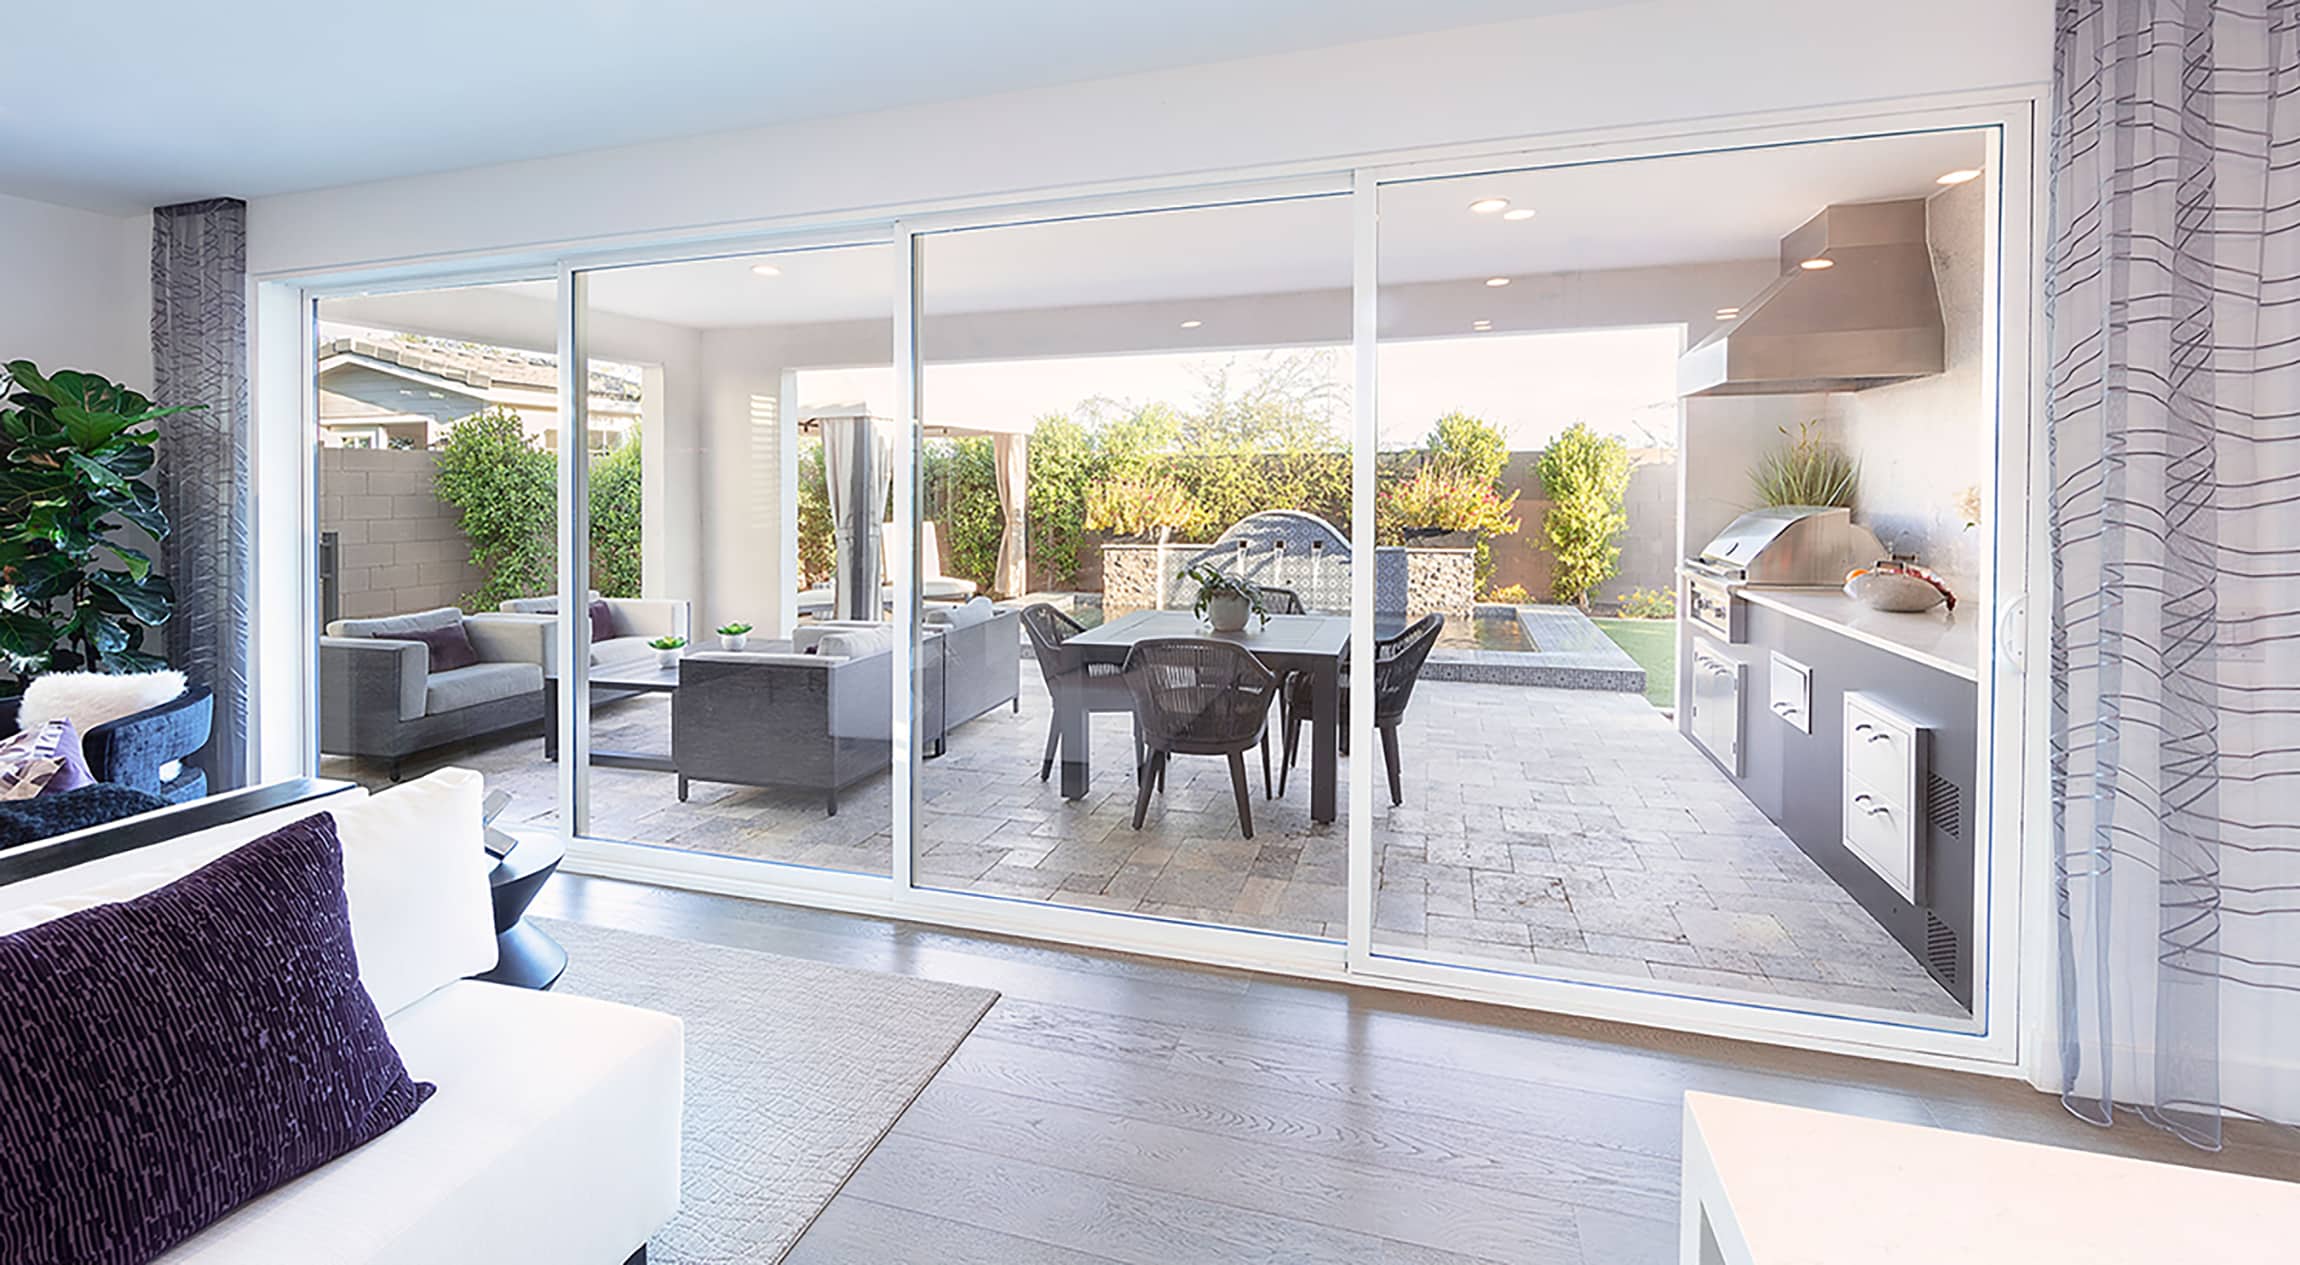 An indoor living room transitions to a furnished outdoor living space through a closed multi-slide glass door.